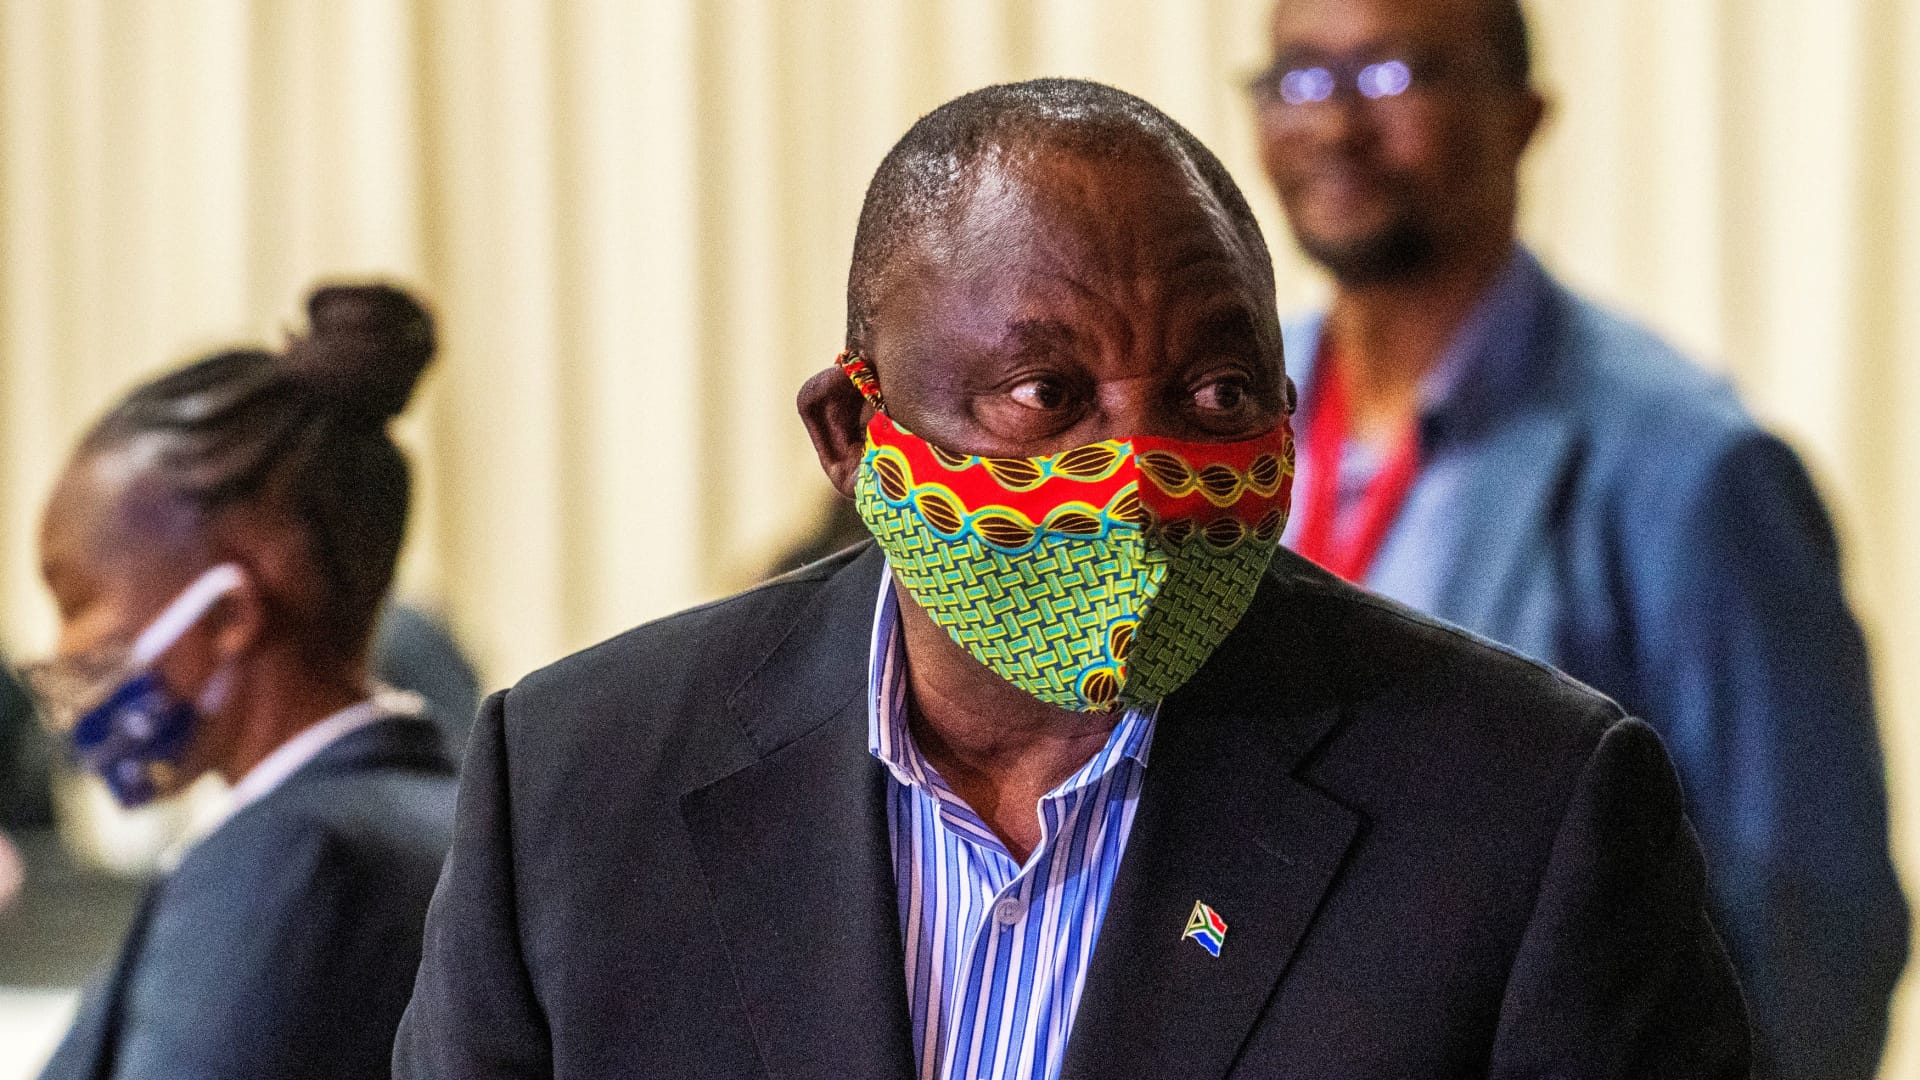 South African President Cyril Ramaphosa visits the coronavirus disease (COVID-19) treatment facilities at the NASREC Expo Centre in Johannesburg, South Africa April 24, 2020.